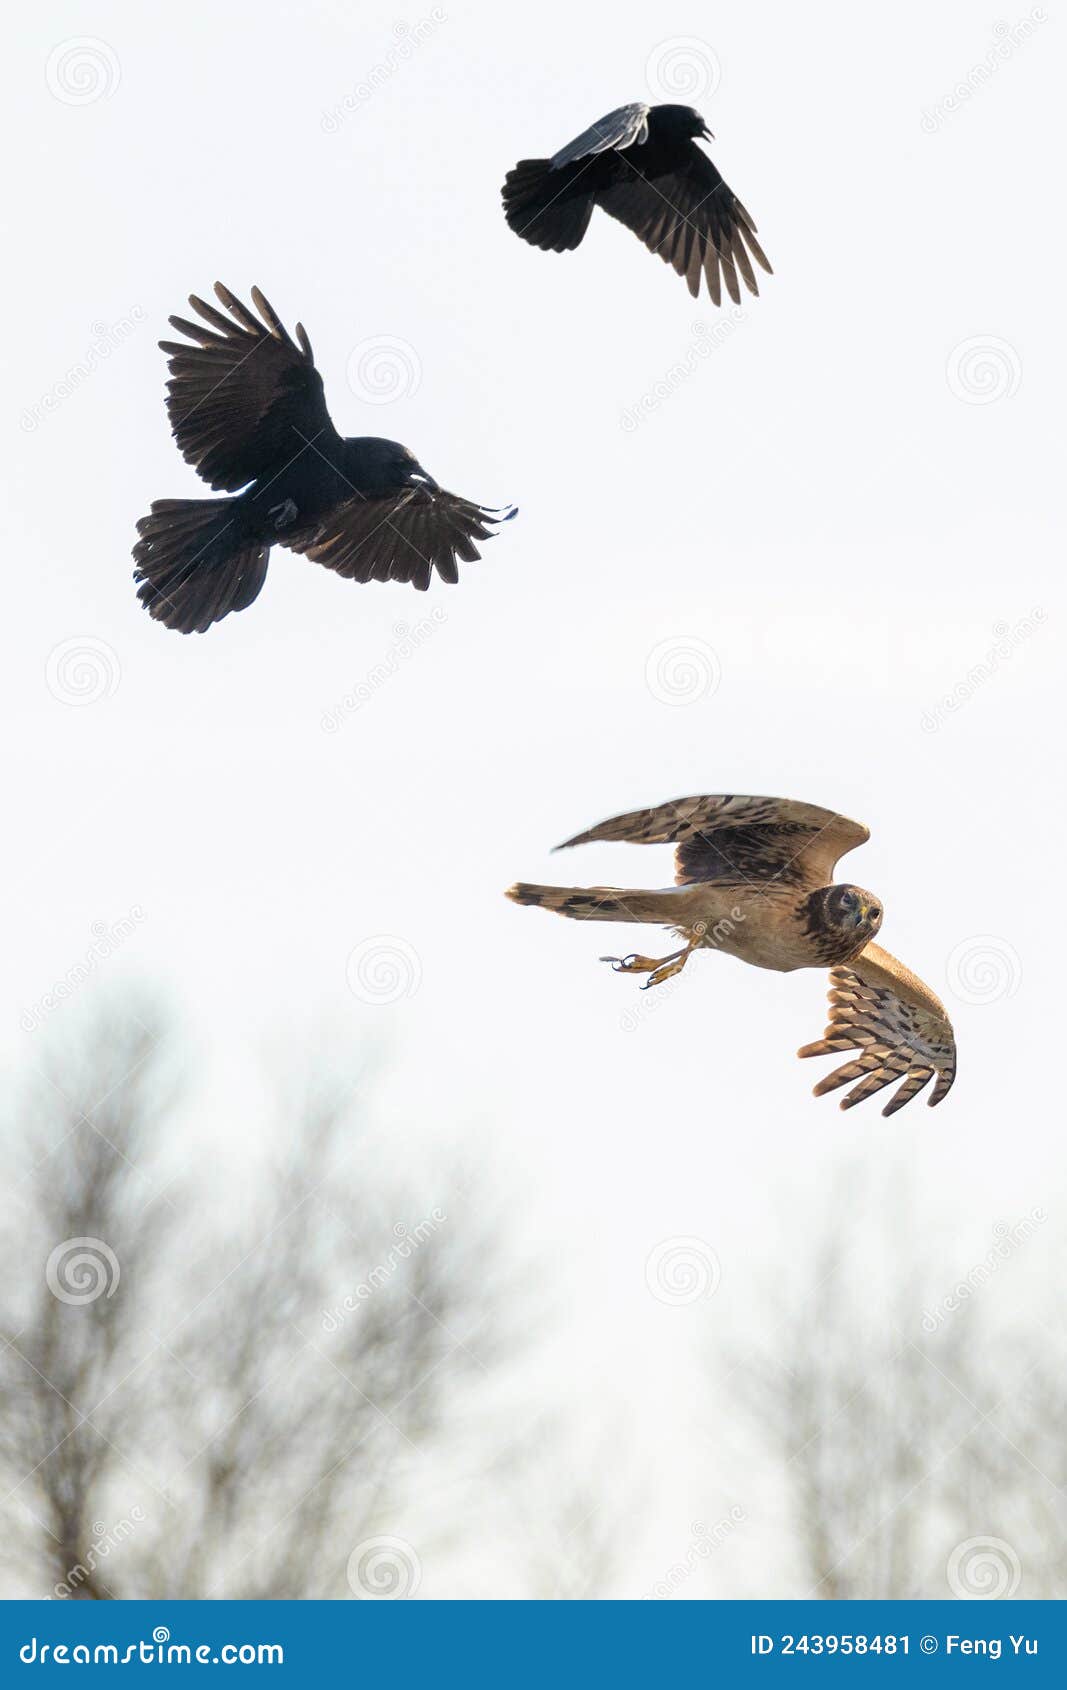 northern harrier harassed by american crows